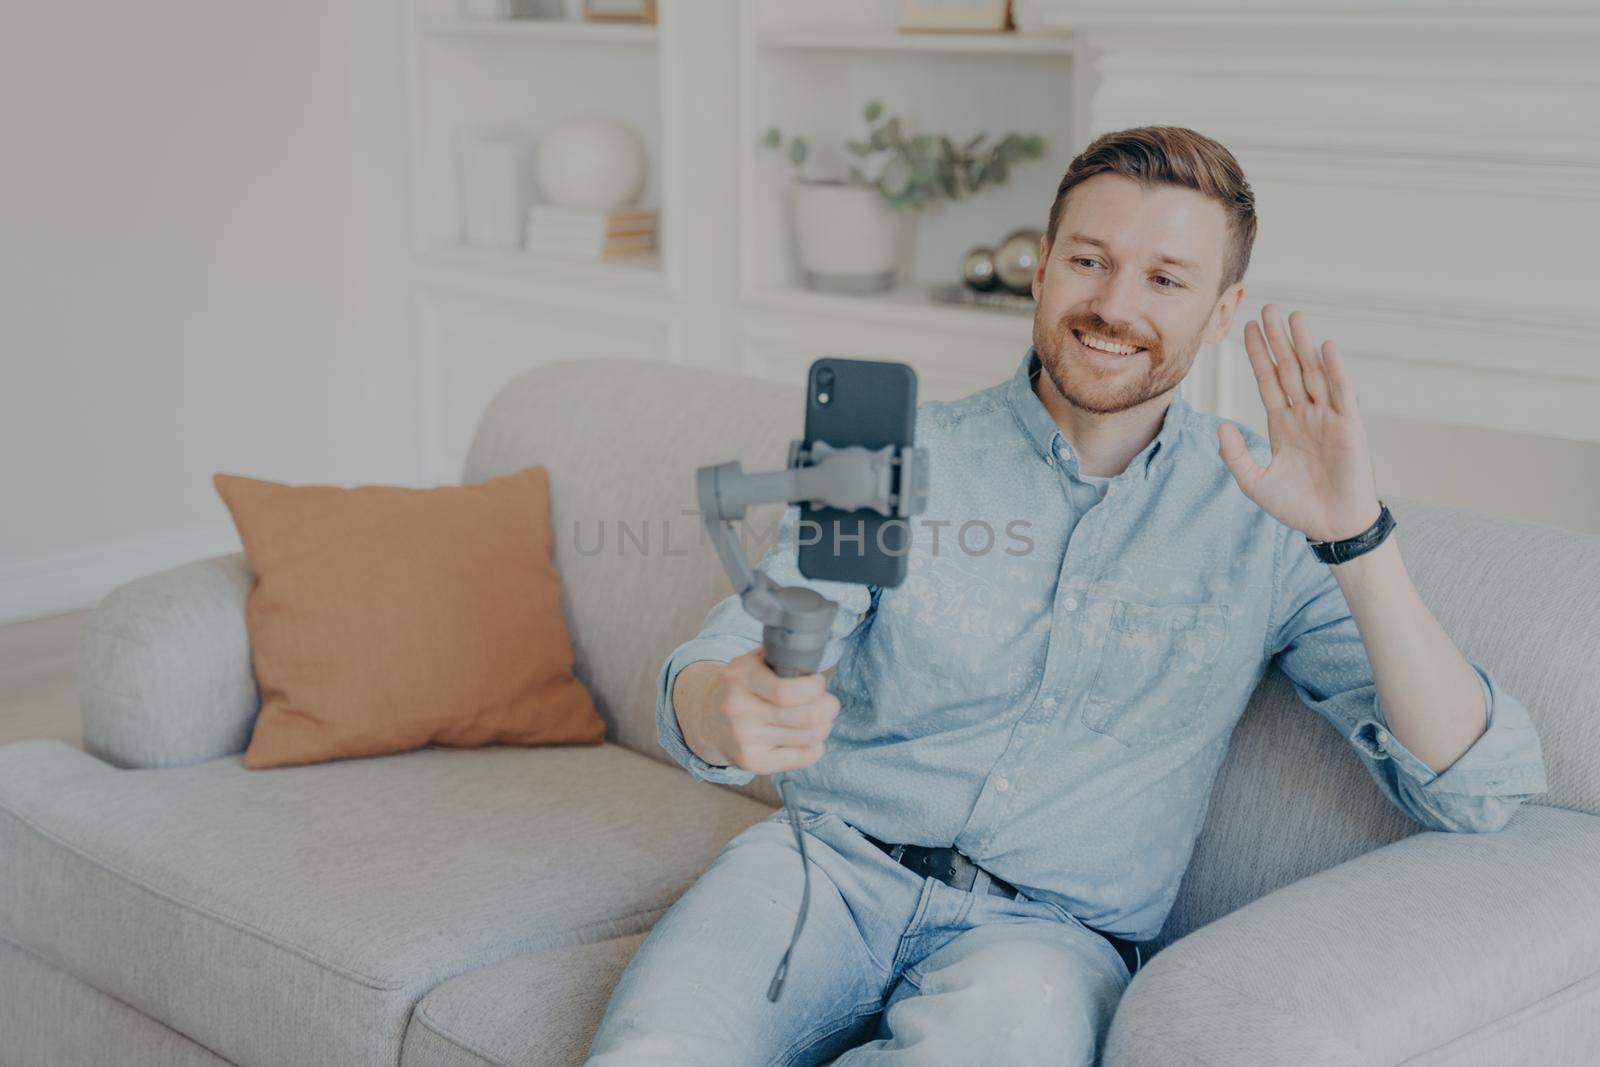 Young man enjoying video chat with friends , looking at phone screen and waving with hand, cheerful bearded man holding smartphone with gimbal stabilizer handheld while sitting on sofa in living room